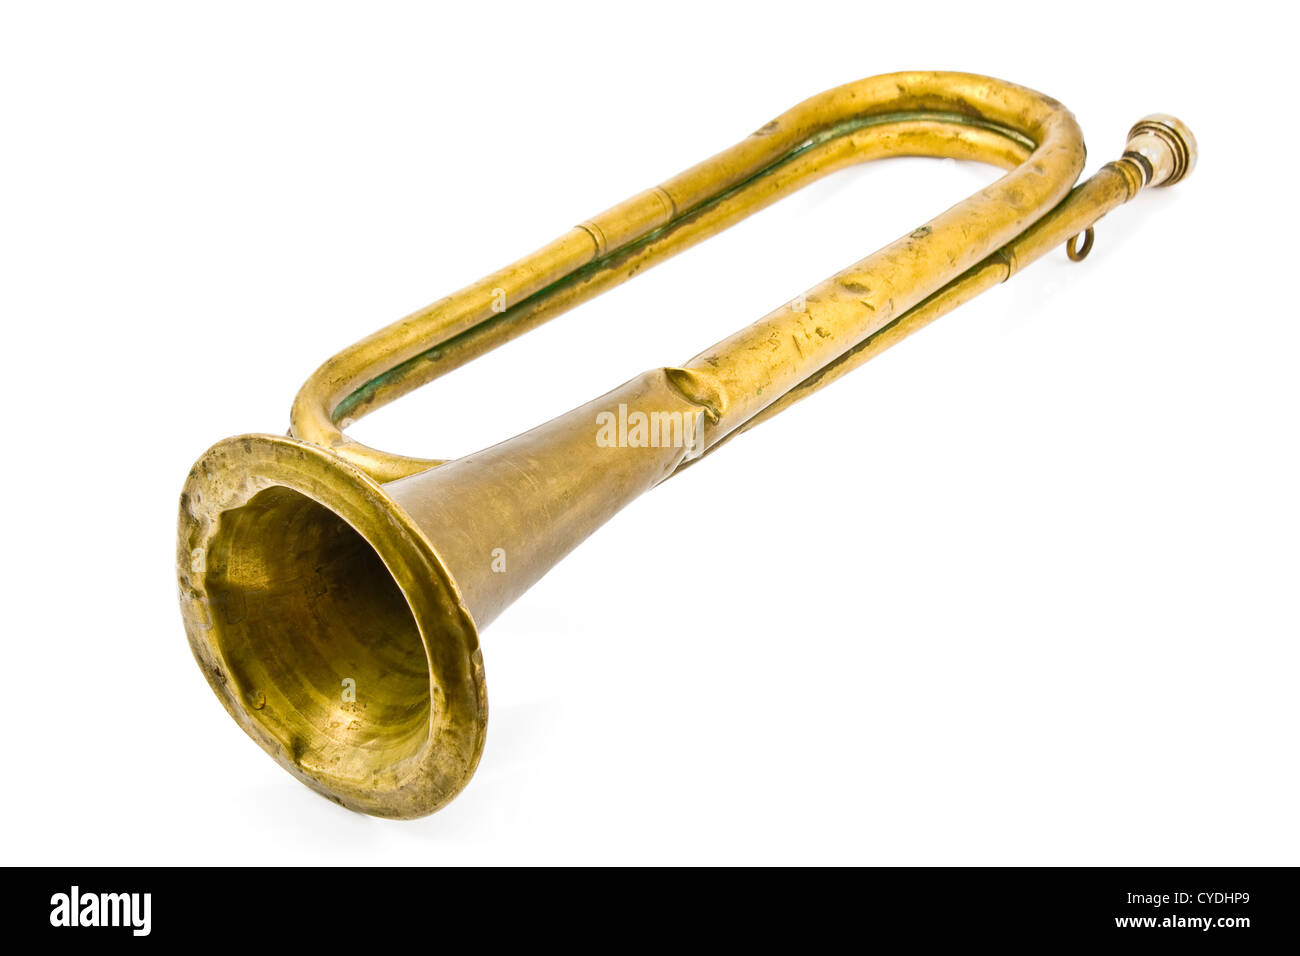 Old broken army trumpet isolated on white Stock Photo